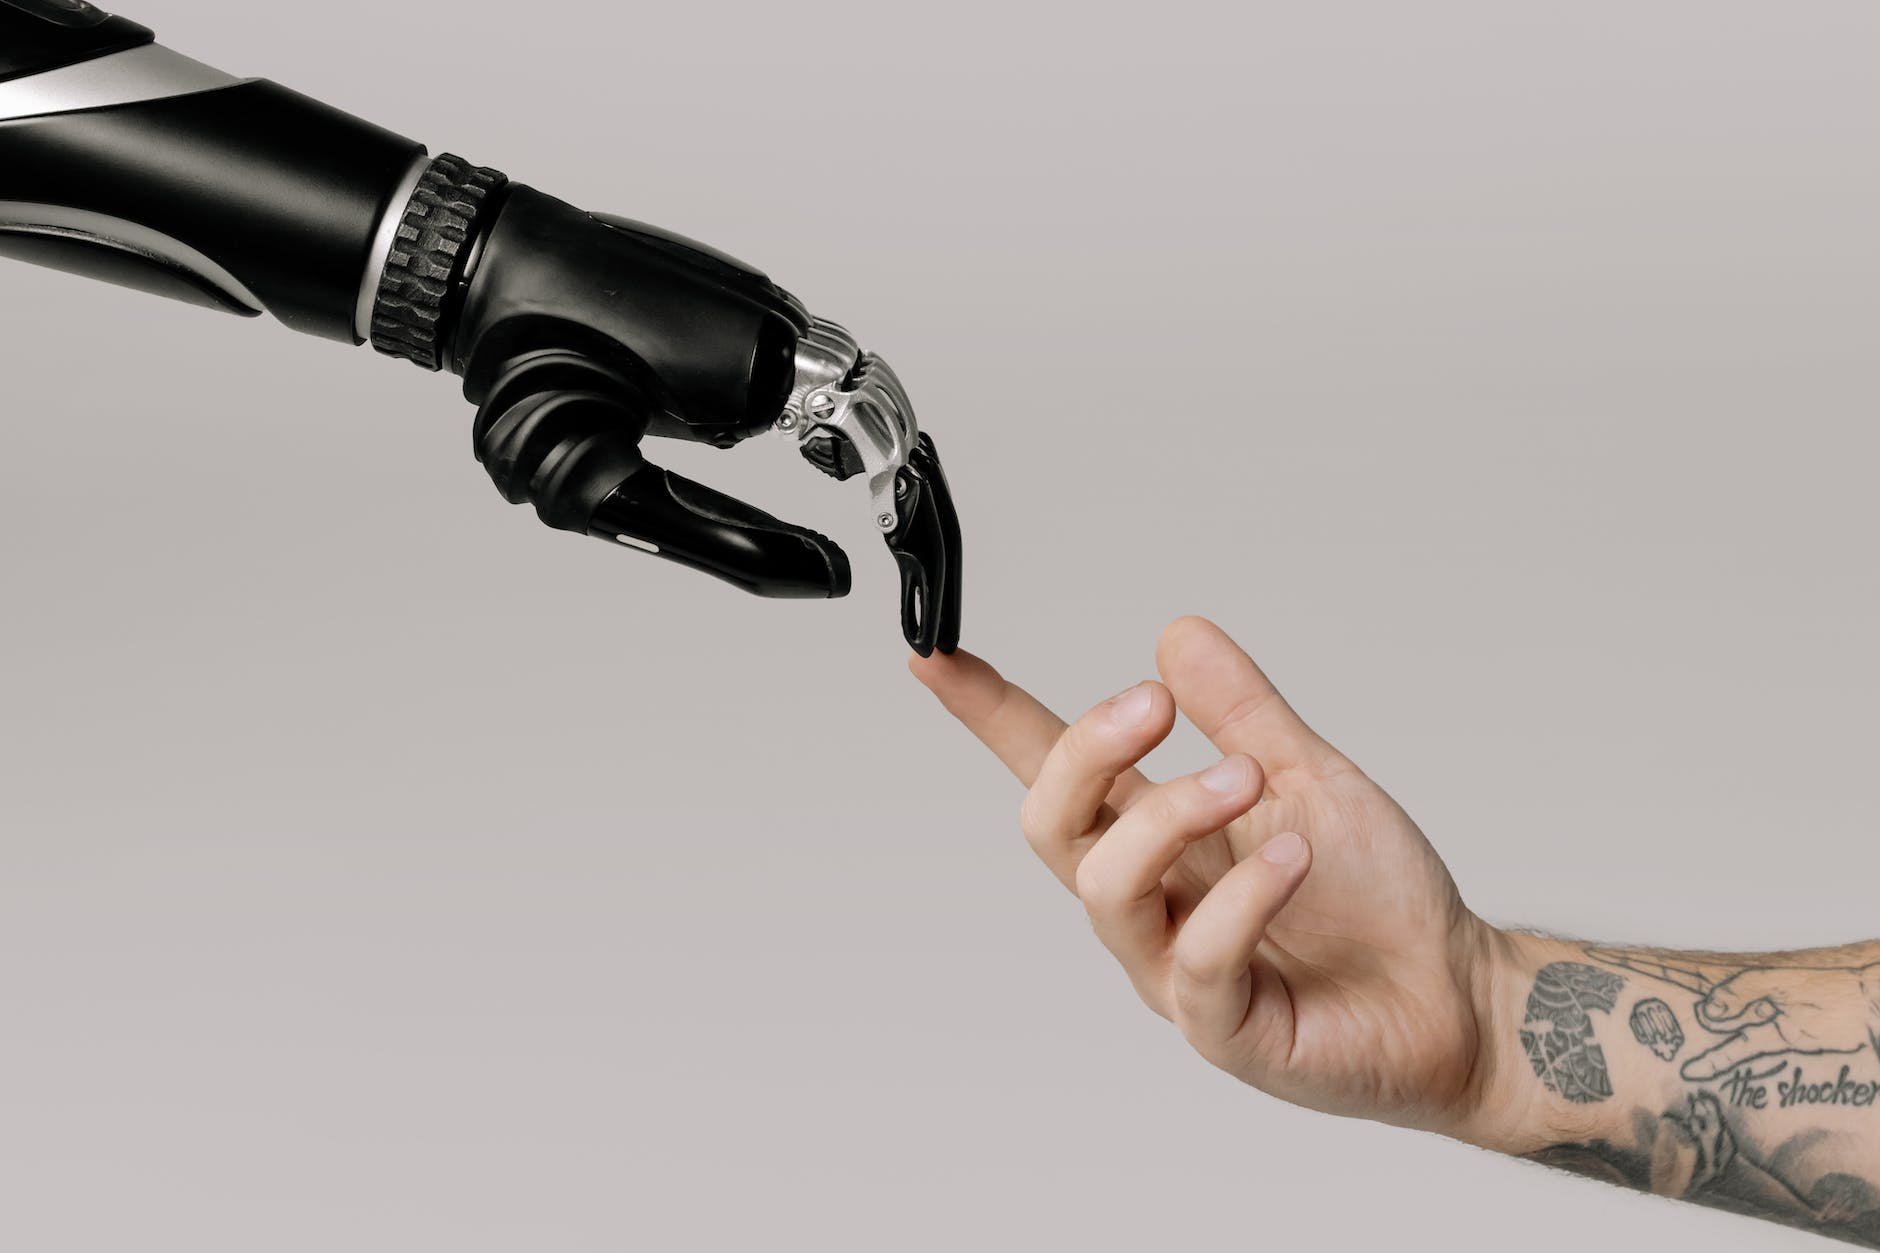 bionic hand and human hand finger pointing - The pros and cons of AI